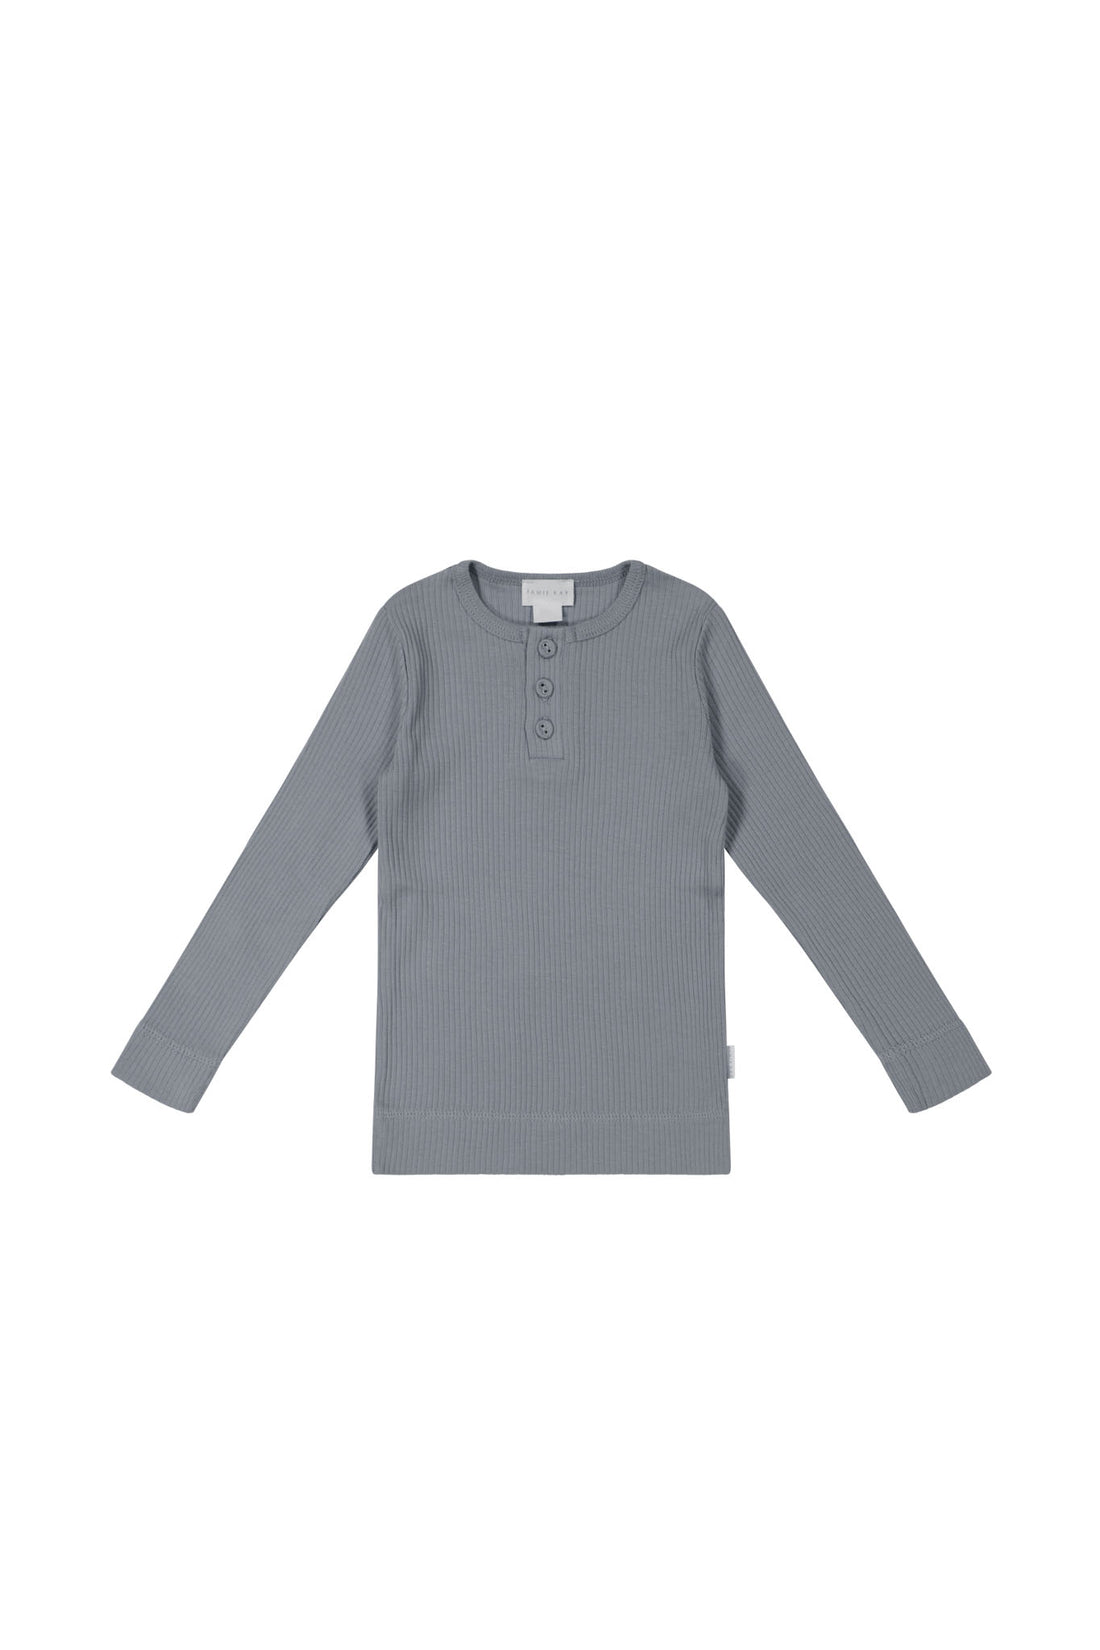 Organic Cotton Modal Long Sleeve Henley - Finch Childrens Top from Jamie Kay NZ